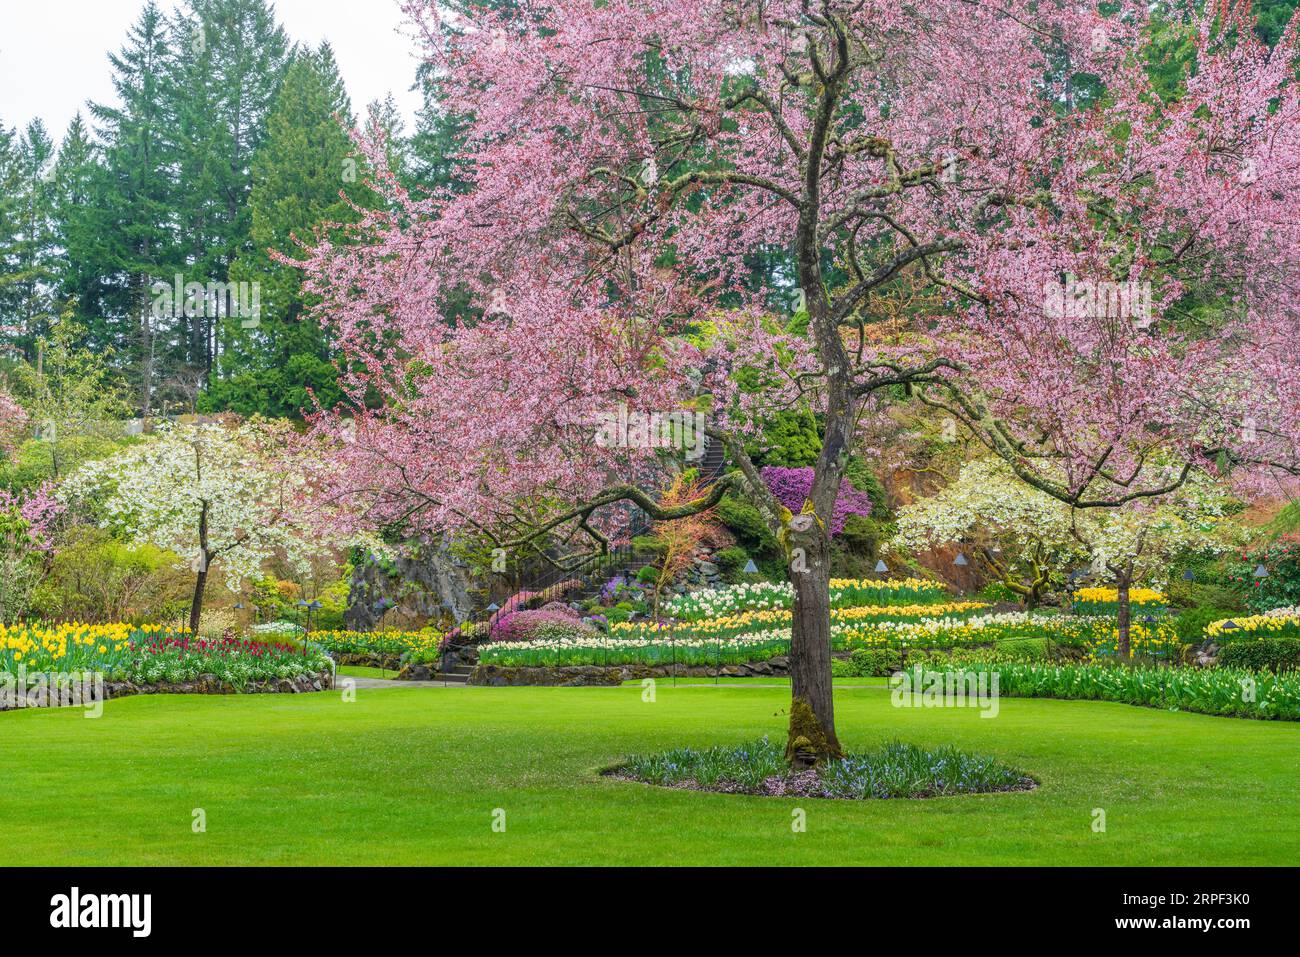 The spring season flower display at the Butchart Gardens, Victoria, Vancouver Island, British Columbia, Canada. Stock Photo